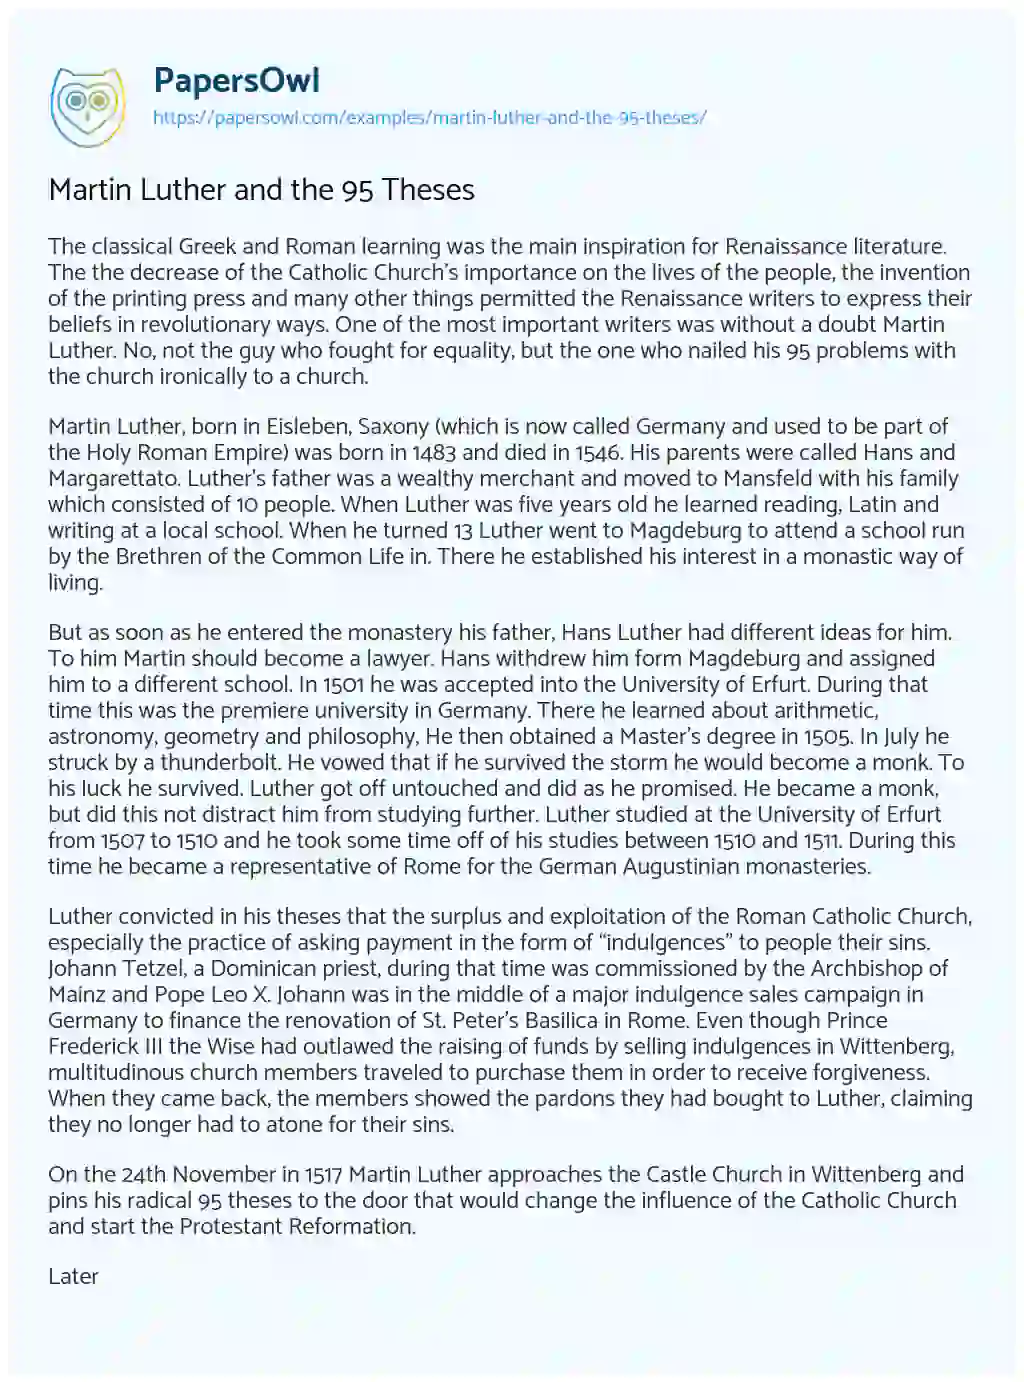 Essay on Martin Luther and the 95 Theses